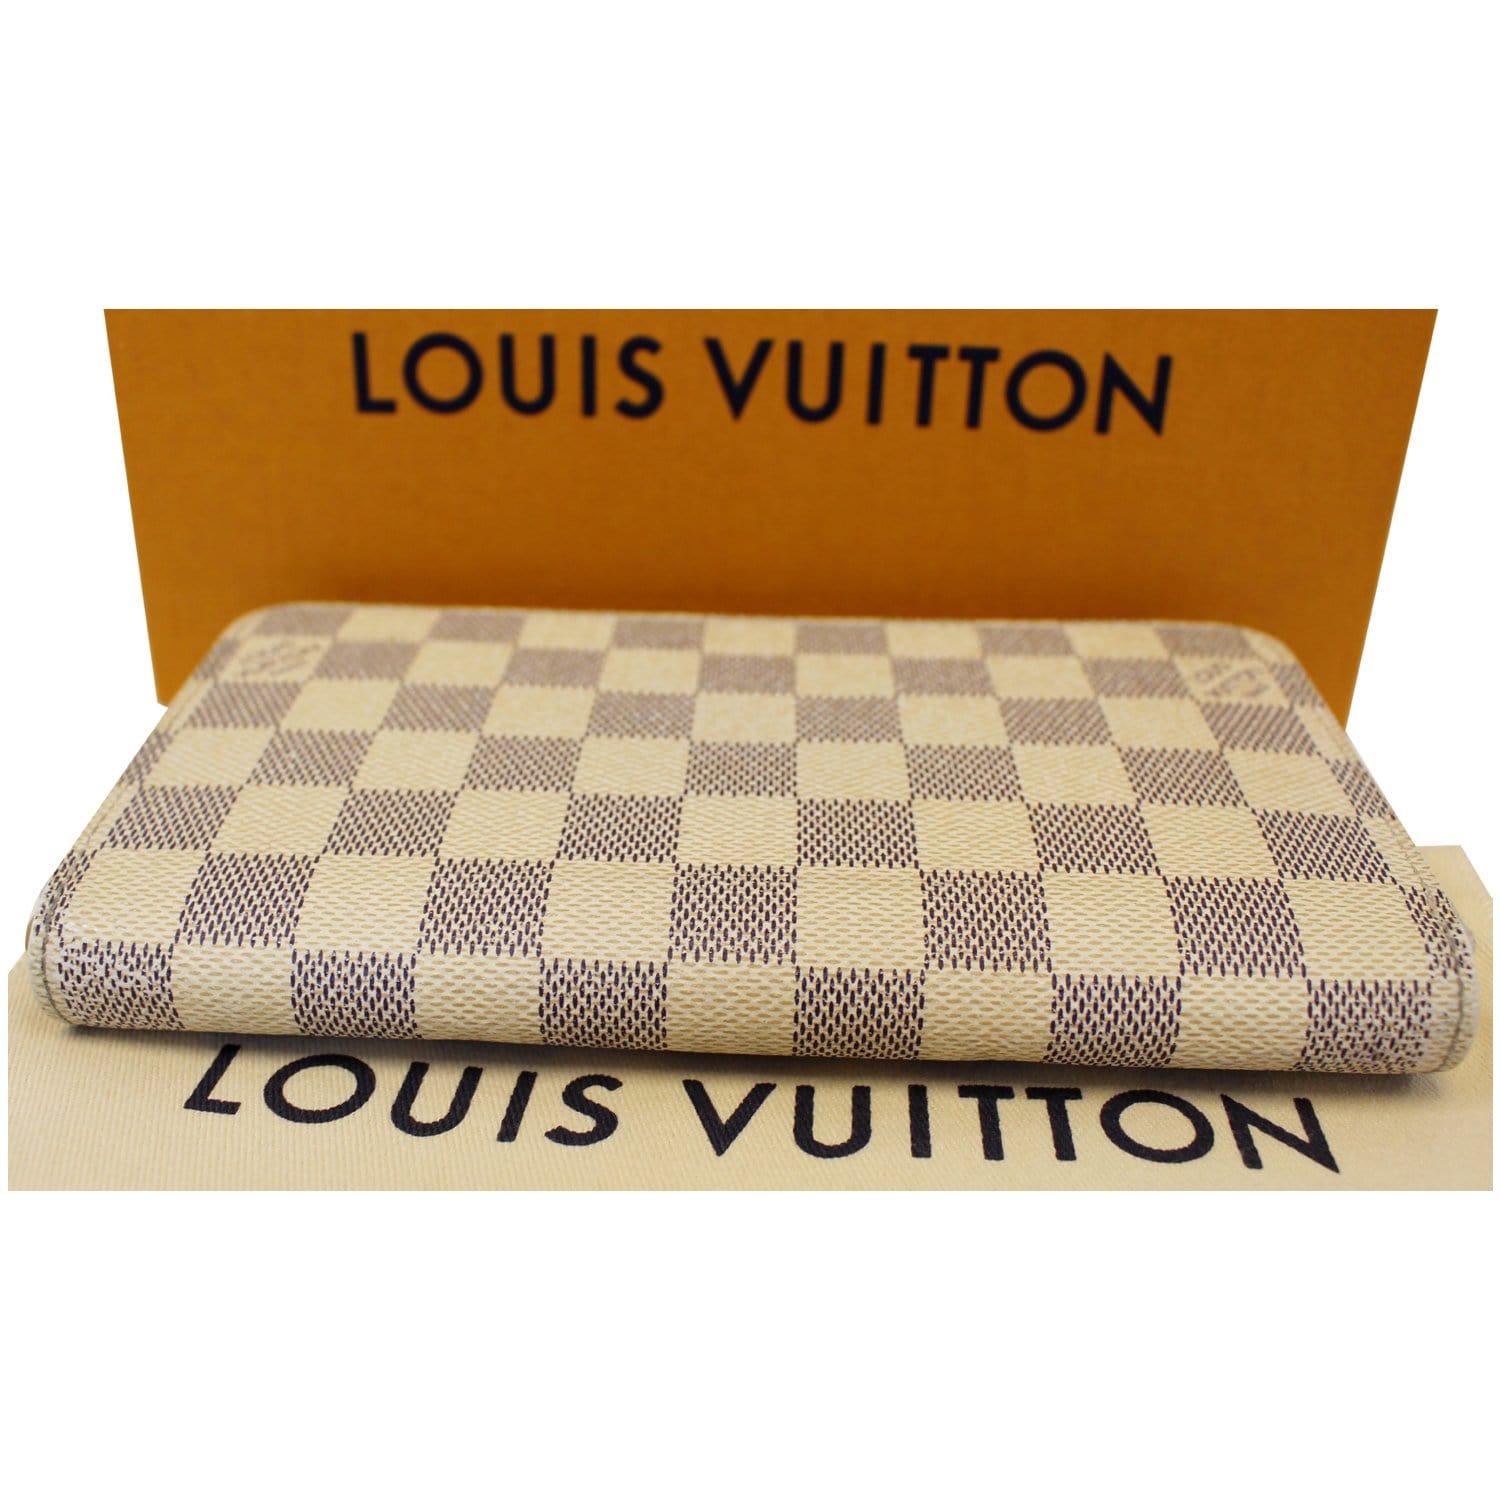 Louis Vuitton Azur Zippy Wallet 7.68 x 4.13 x 0.98 inches Original MSRP:  $850 Our price: $400 Date code: CA4008 Priced according to…